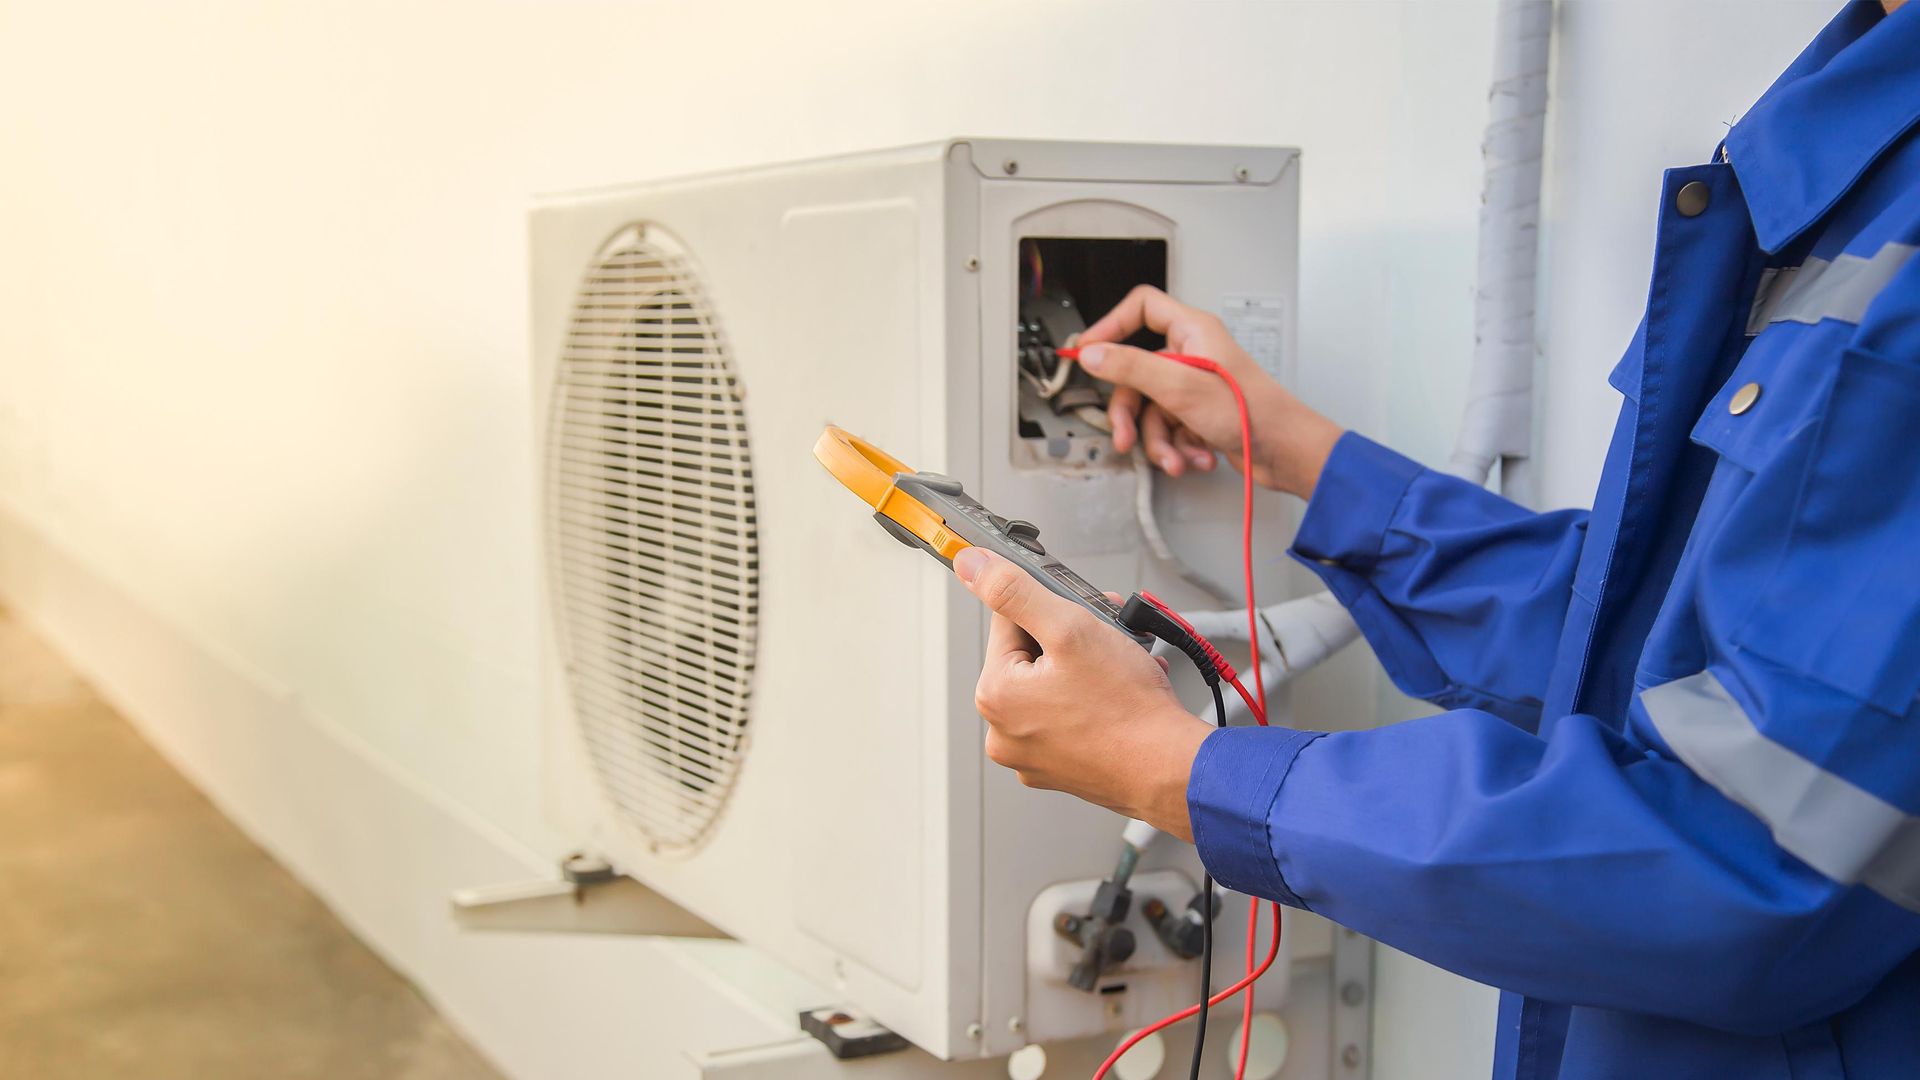 a man in a blue uniform is working on an air conditioner .